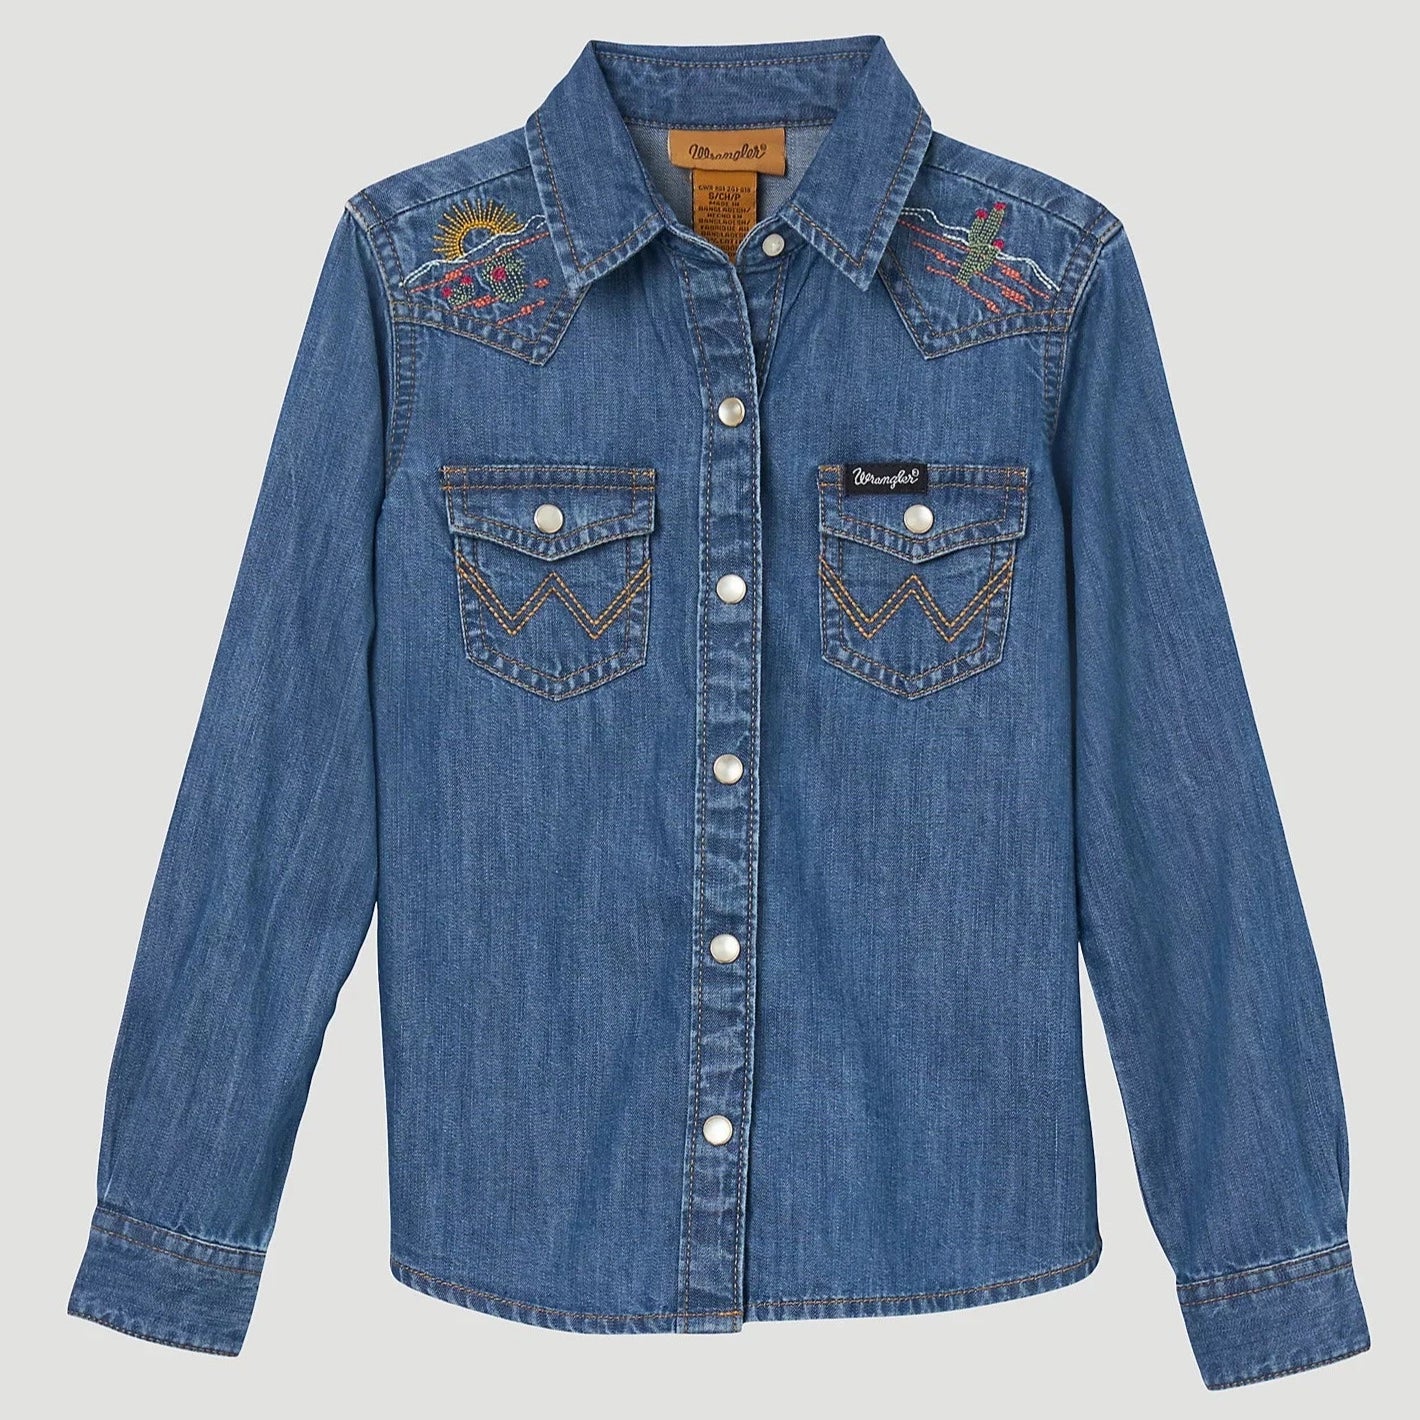 Buy Wingzss Denim Shirt for Women (Small) Blue at Amazon.in